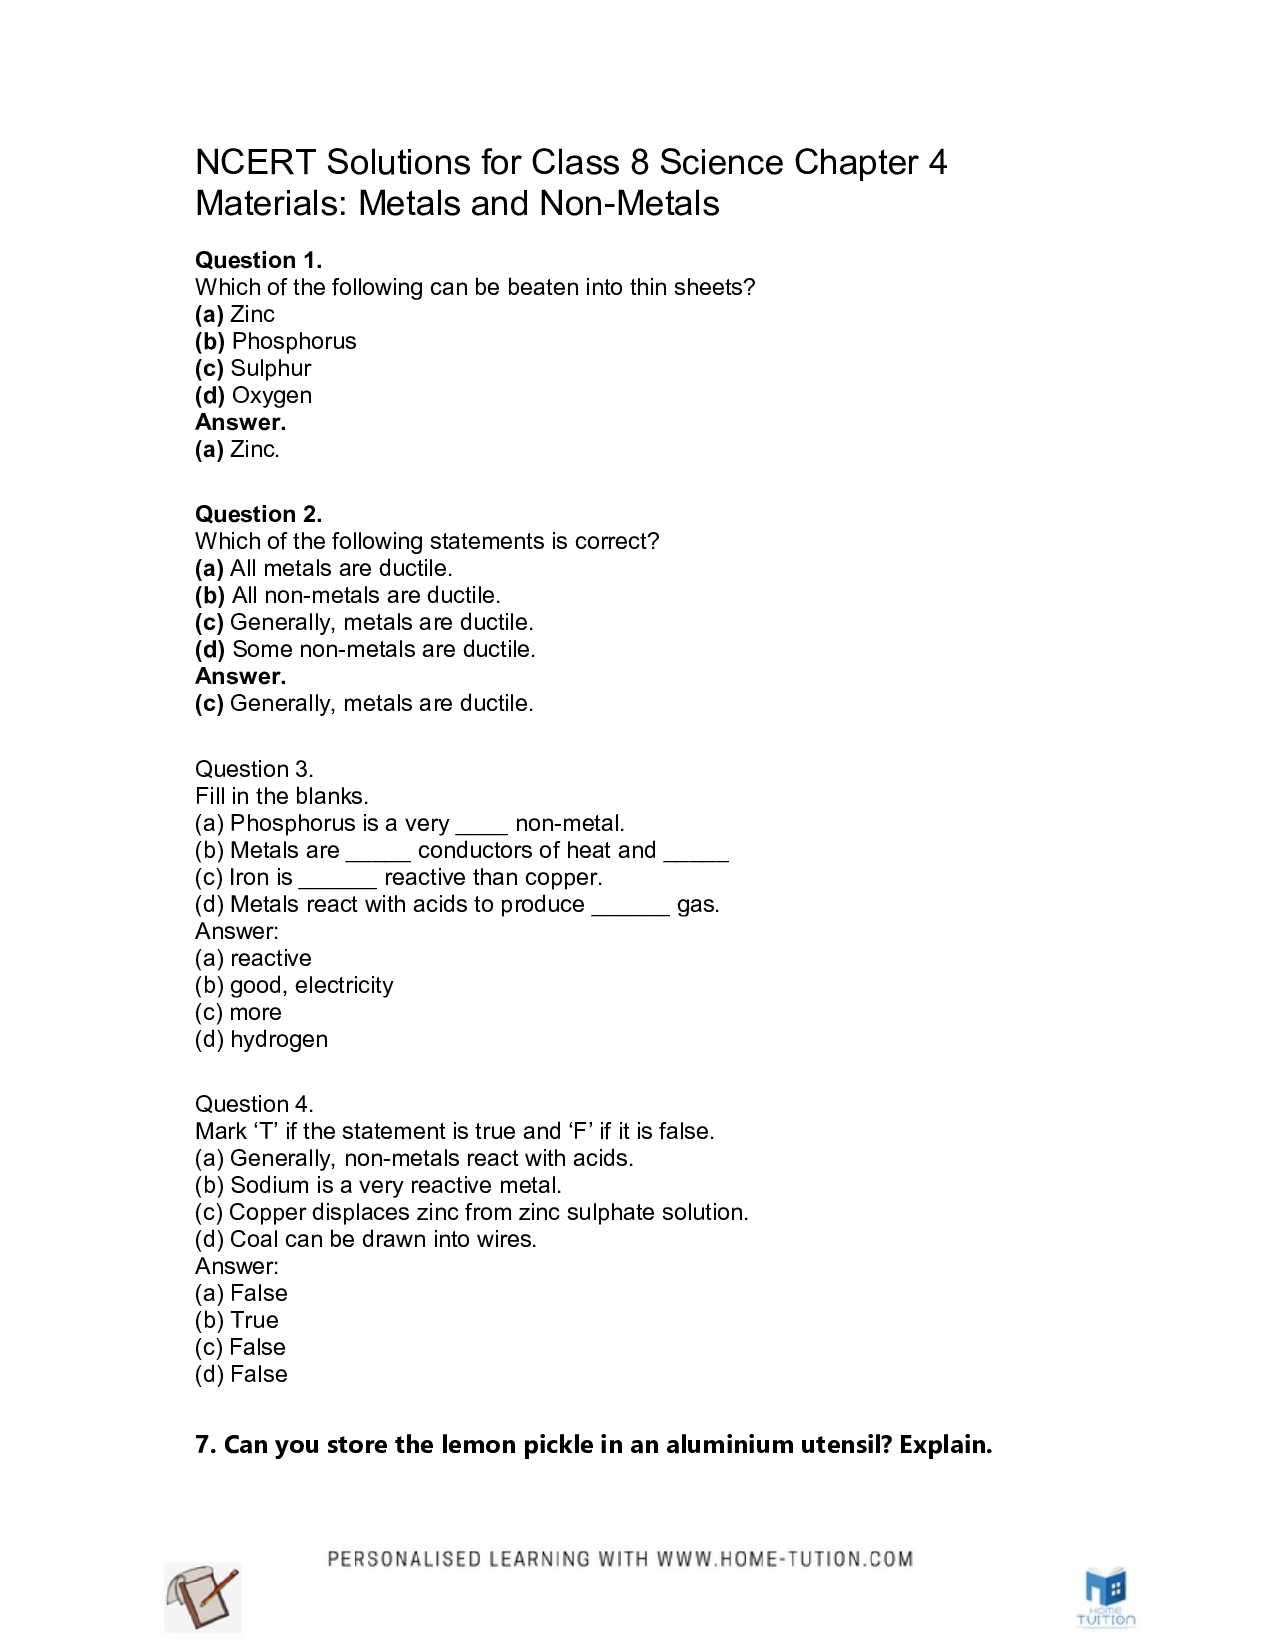 Class 8 Science Chapter 4 Materials: Metals and Non-Metals